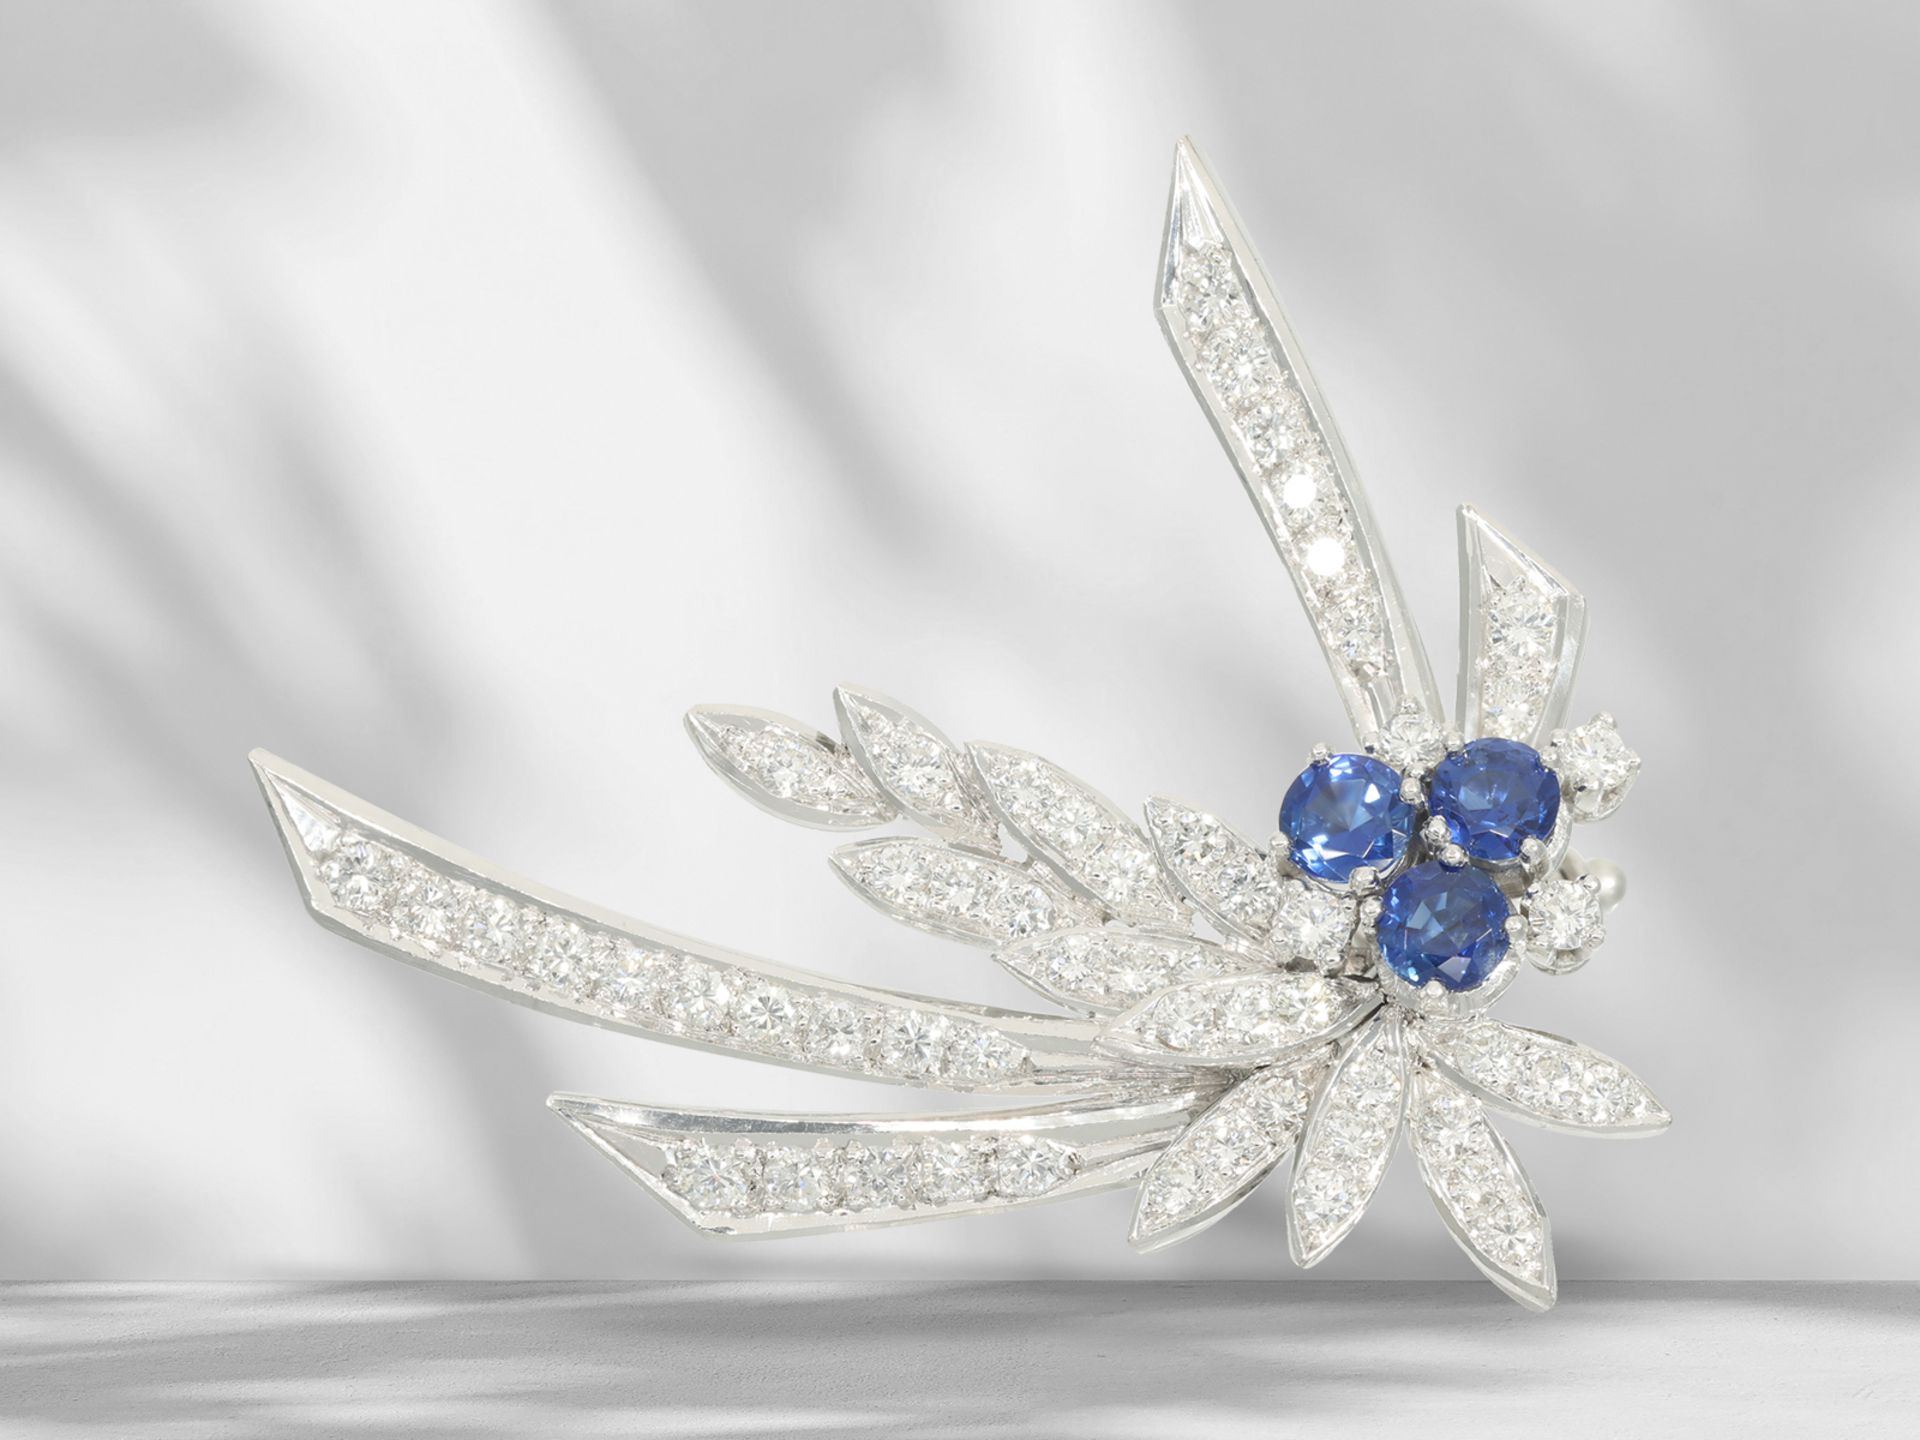 Brooch/pin: decorative vintage flower brooch in 18K white gold with sapphire and brilliant-cut diamo